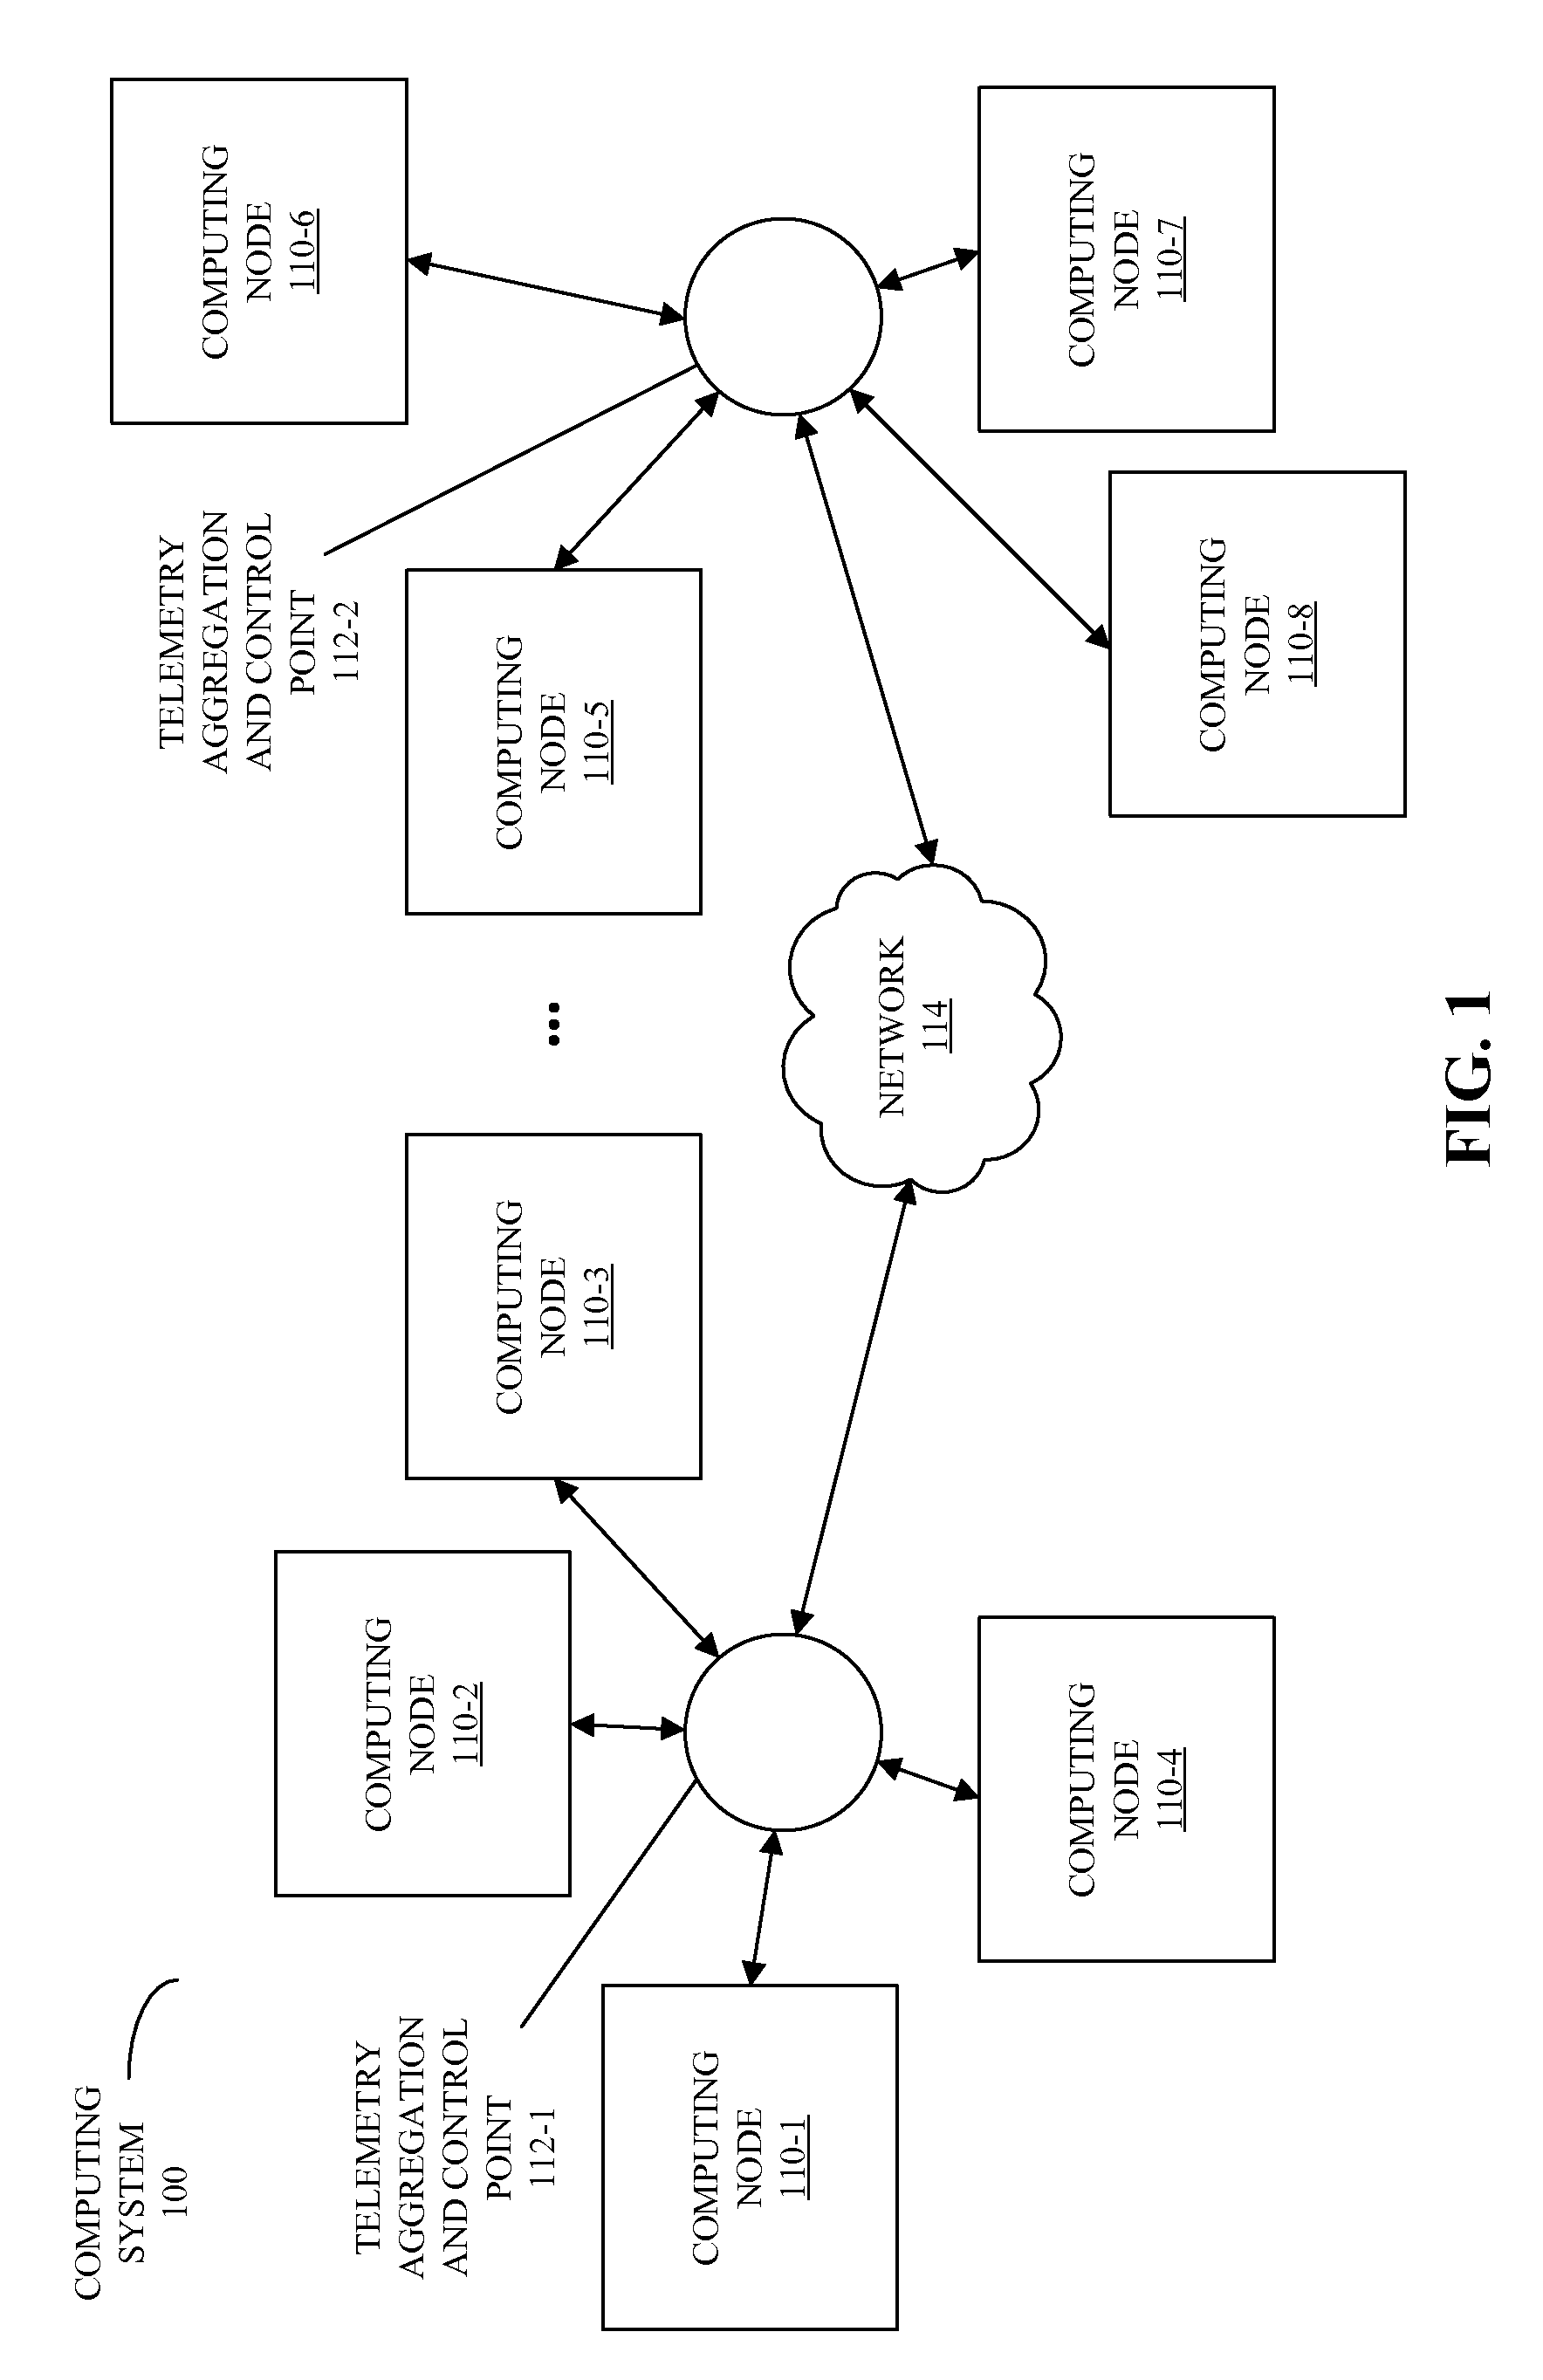 Risk indices for enhanced throughput in computing systems